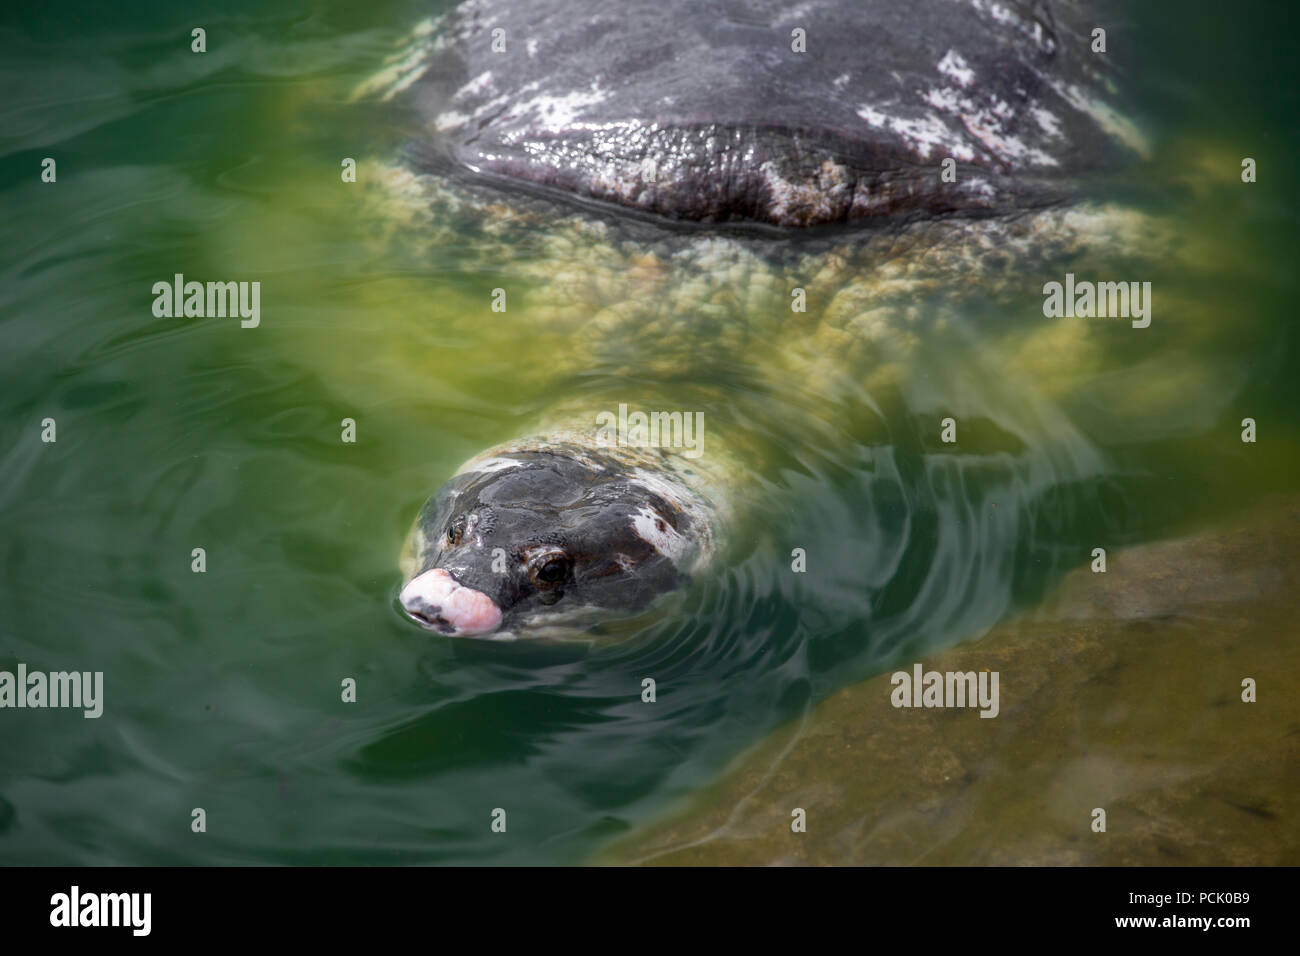 Black Soft Shell turtles known as Bostami Turtle In front of the tomb. Stock Photo